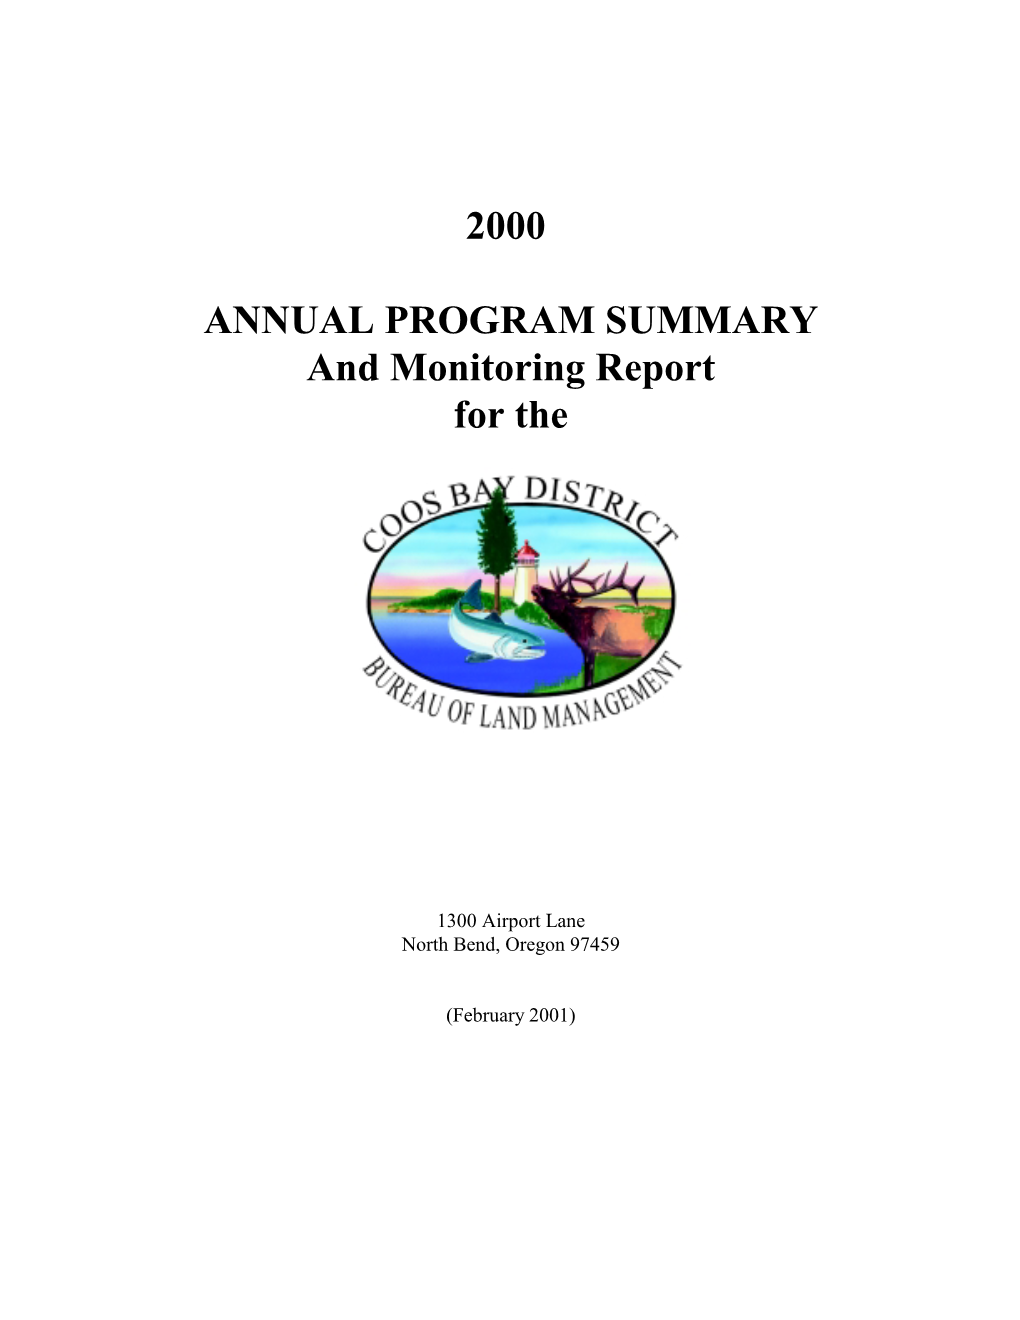 2000 Annual Program Summary for the Coos Bay District